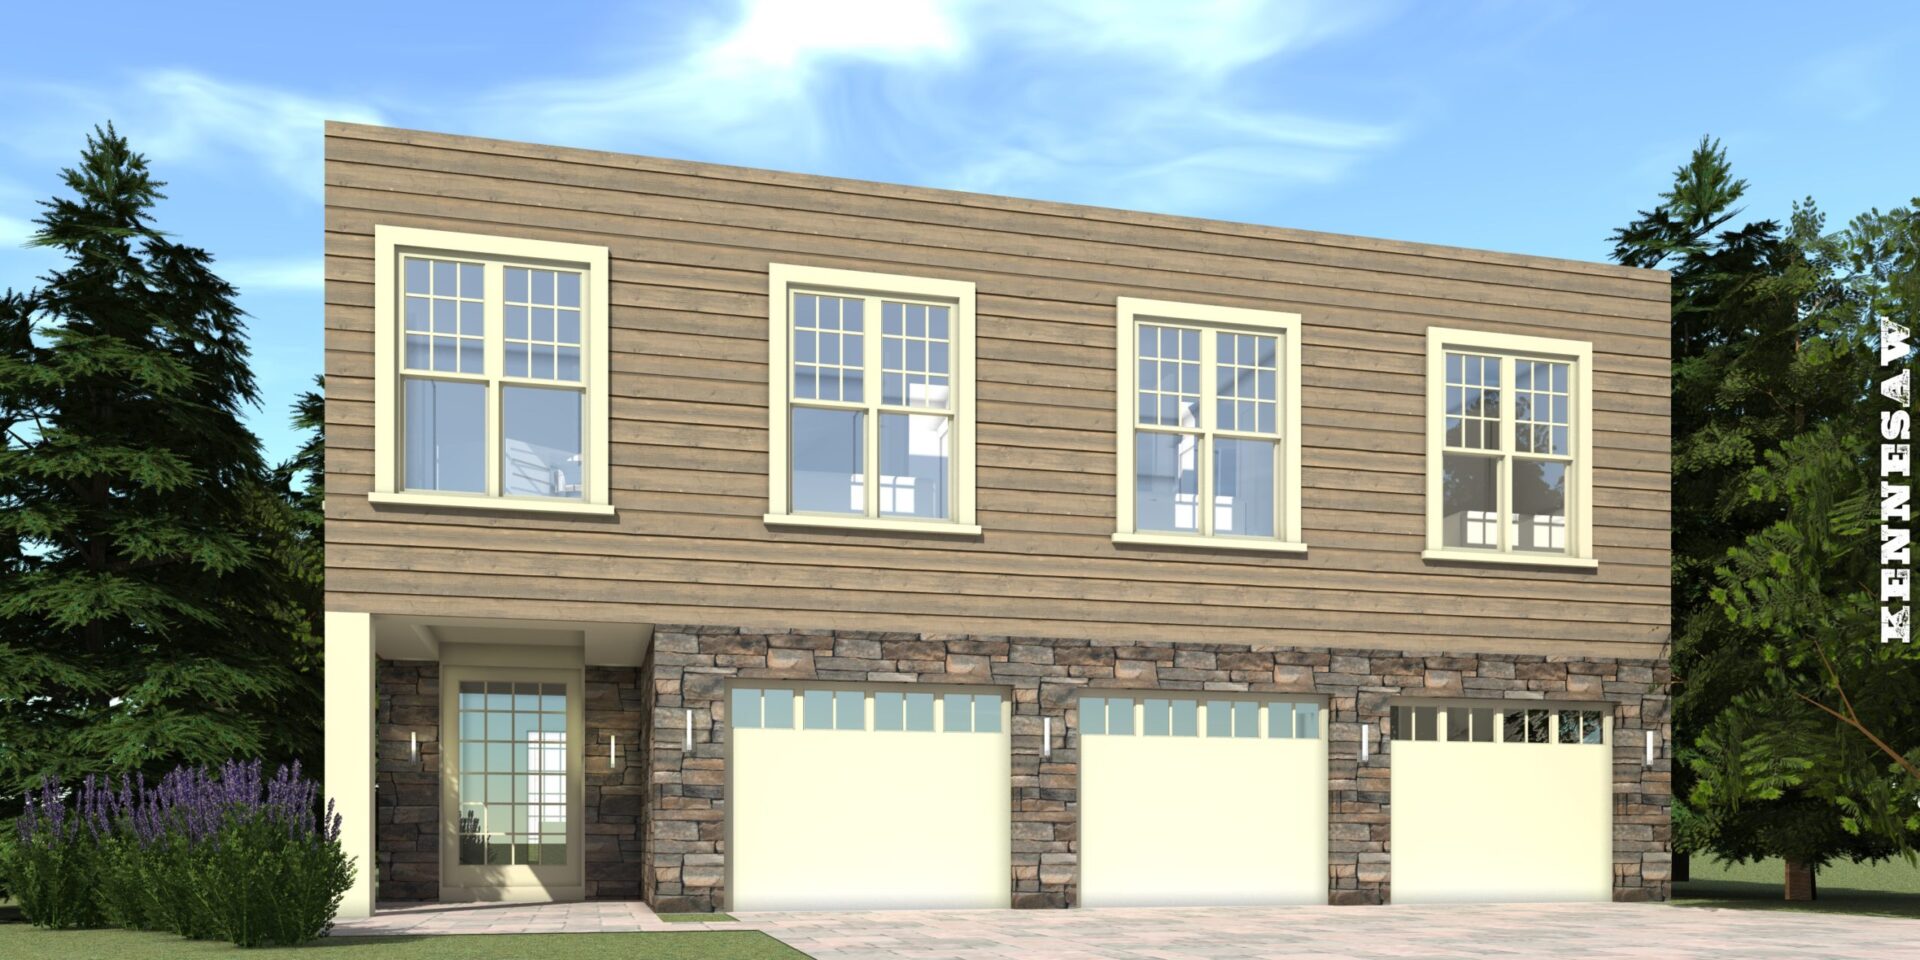 5 Bedroom House for Small Lot. Kennesaw by Tyree House Plans.